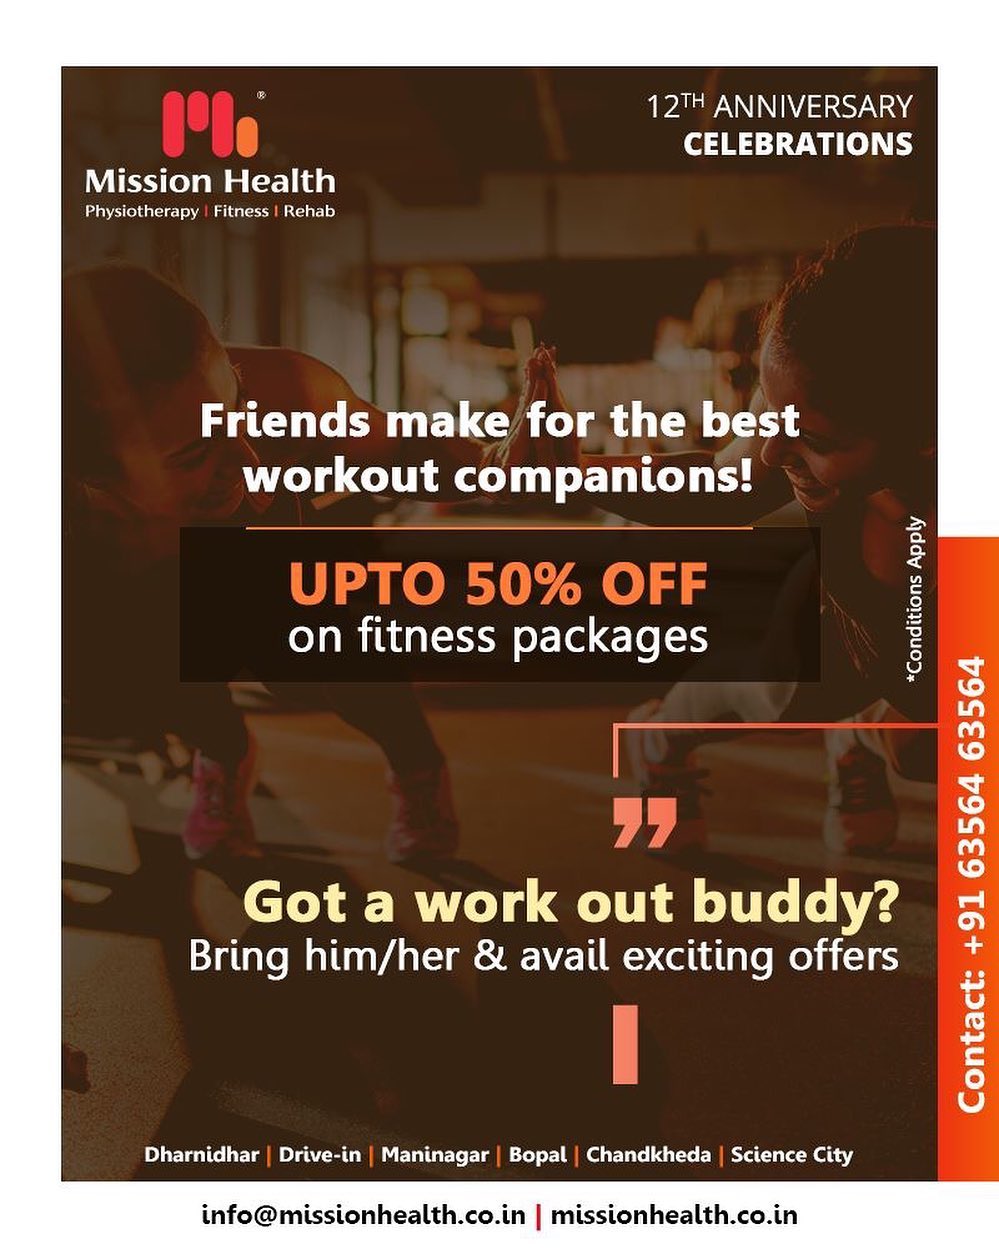 Gymming is fun when you have your best friend as your working out partner! Last few days to avail exciting offers on Fitness at Mission Health! 
#FitnessOffers #JuneOffers #GetFit #MissionHealth #MissionHealthIndia #fitnessRehab #AbilityClinic #MovementIsLife #weightloss #fitness #fitnessoffer #weightmanagement